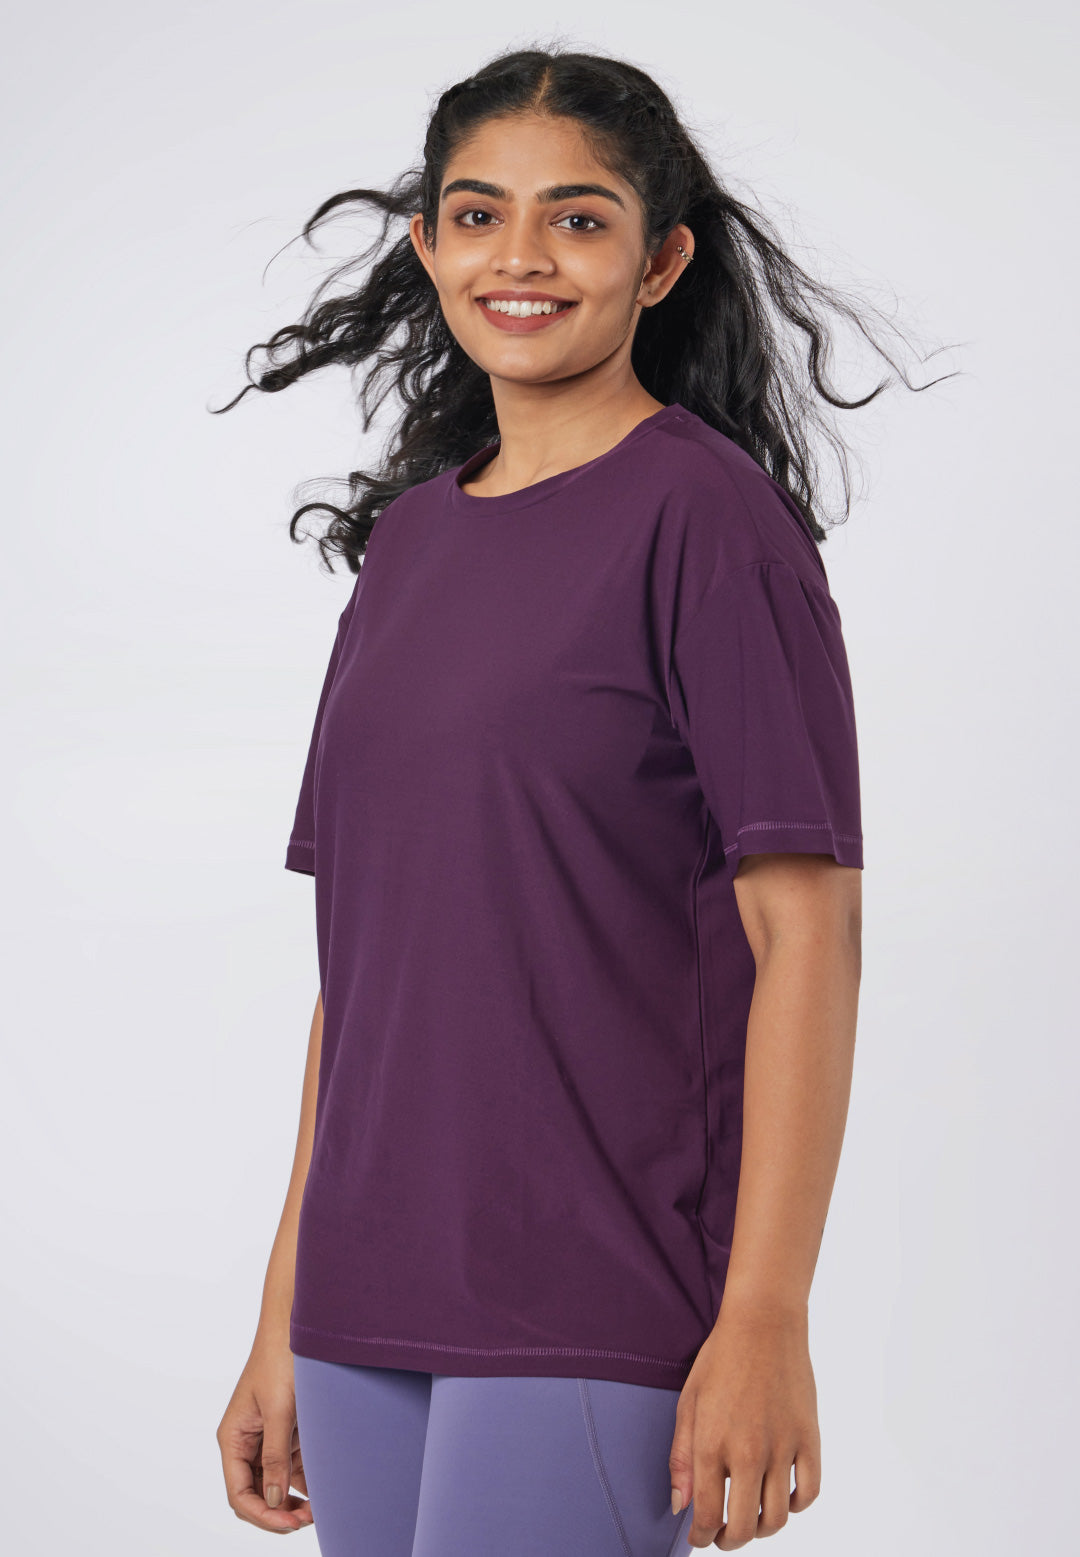 Buy Women's Polyester T-shirts Online from Blissclub